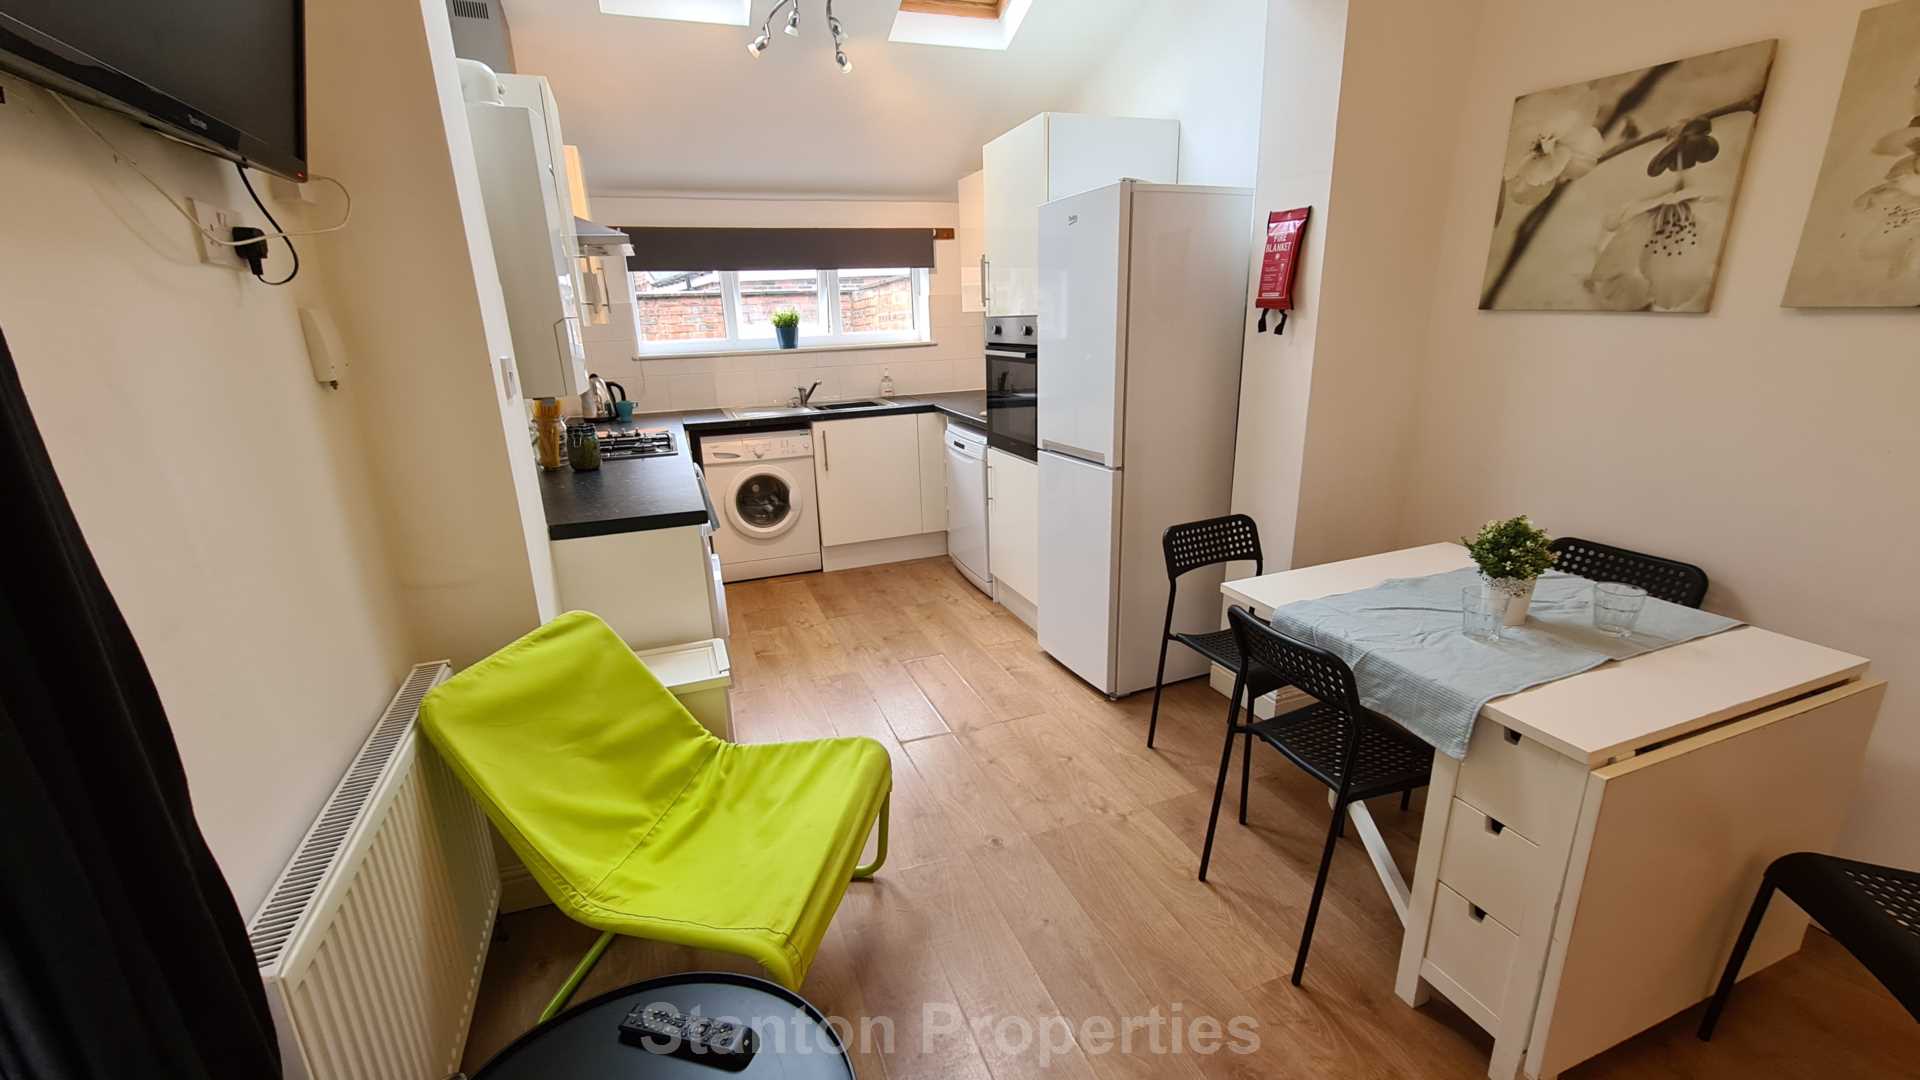 £130 pppw, See Video Tour, Mabfield Road, Fallowfield, Image 15